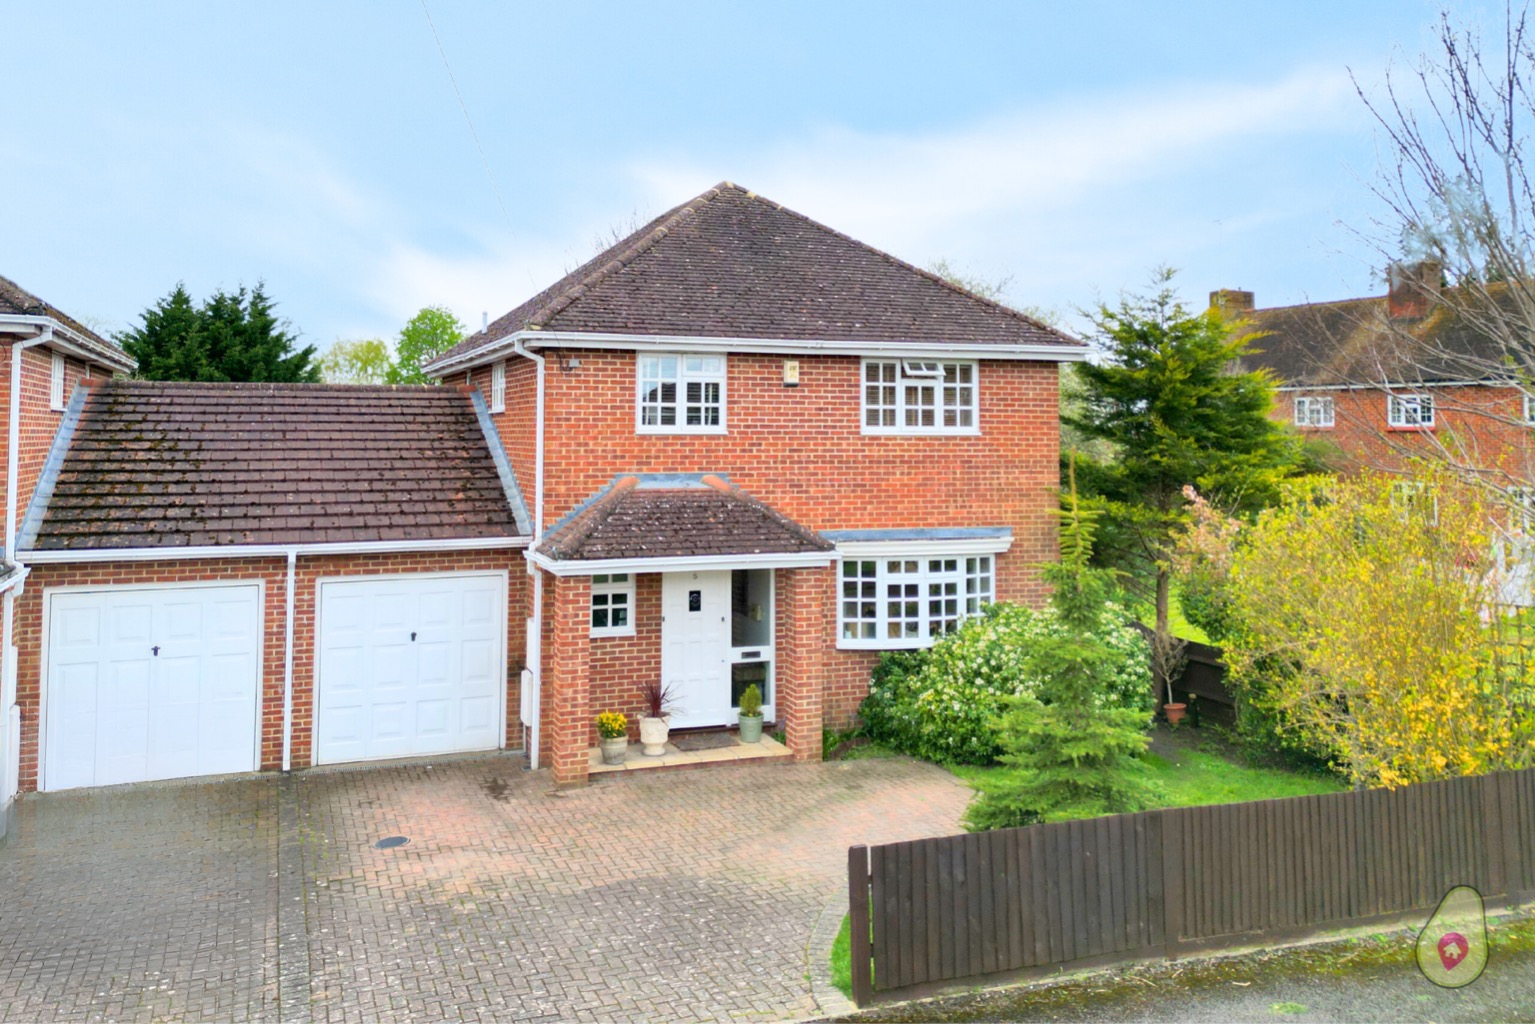 4 bed link detached house for sale in Wheatfields Road, Wokingham - Property Image 1